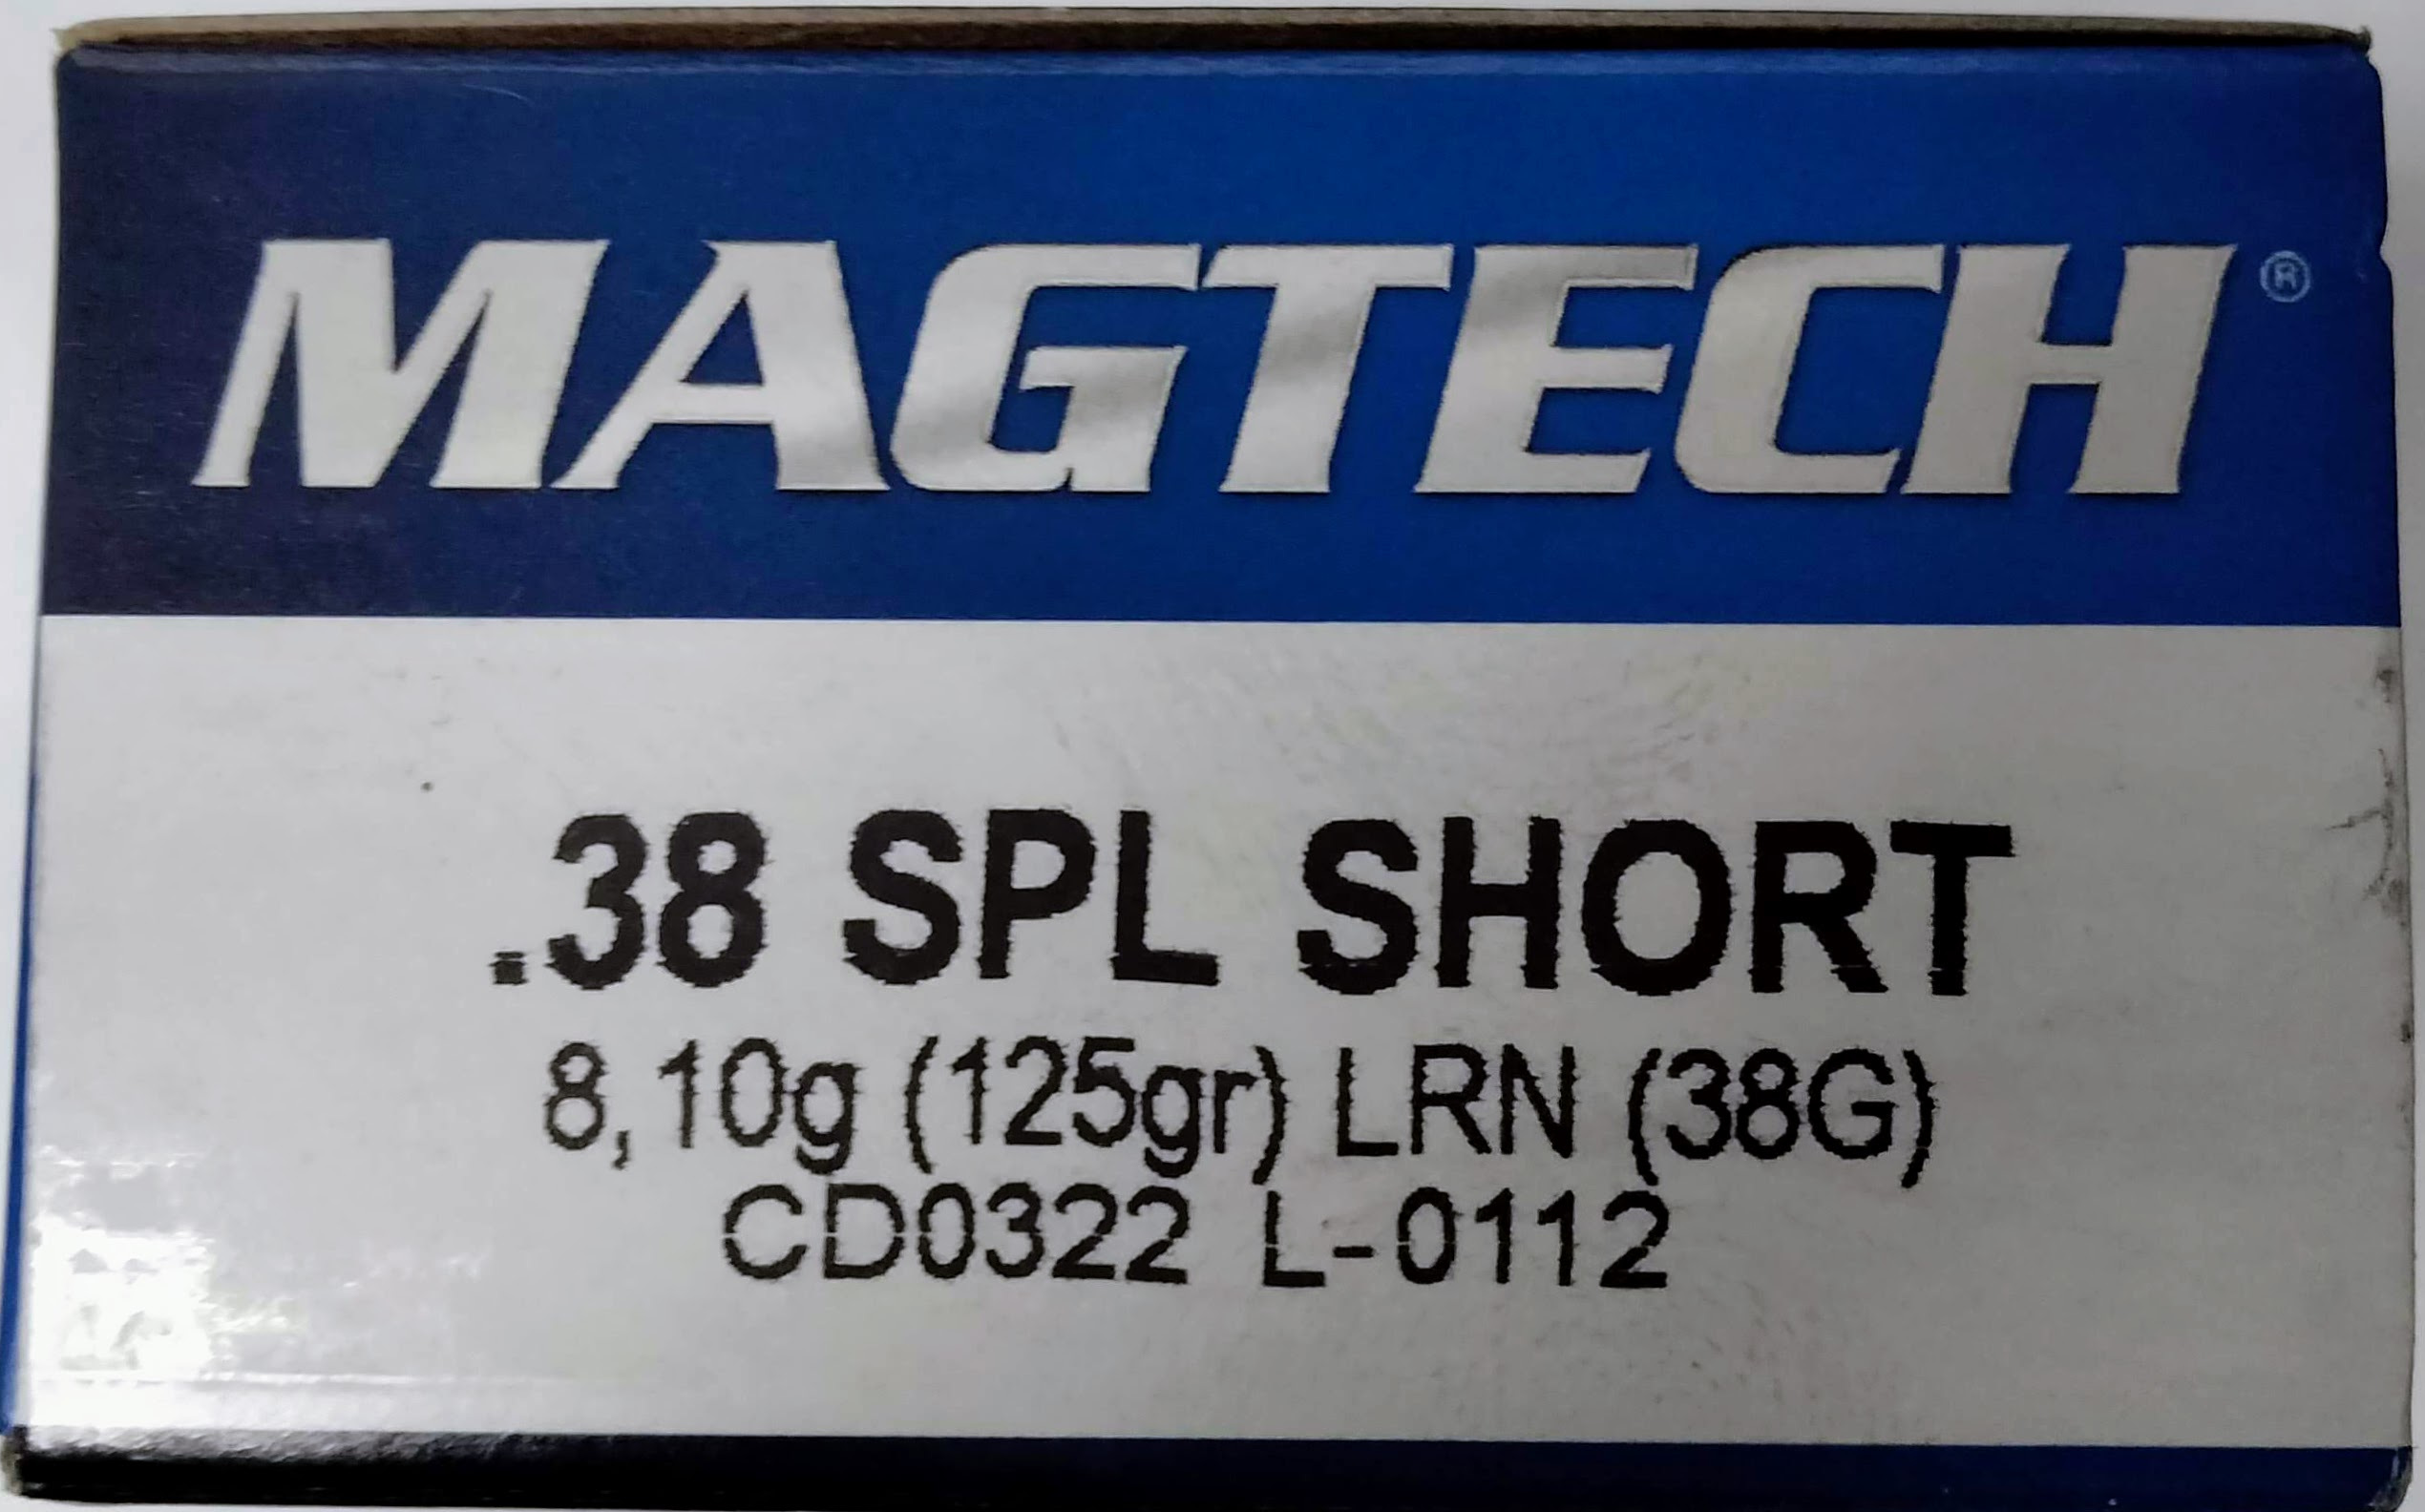 38 Special short Magtech 125 gr. Lead Round Nose LRN 50 rnds Brass M-ID: 38G UPC: 754908164417